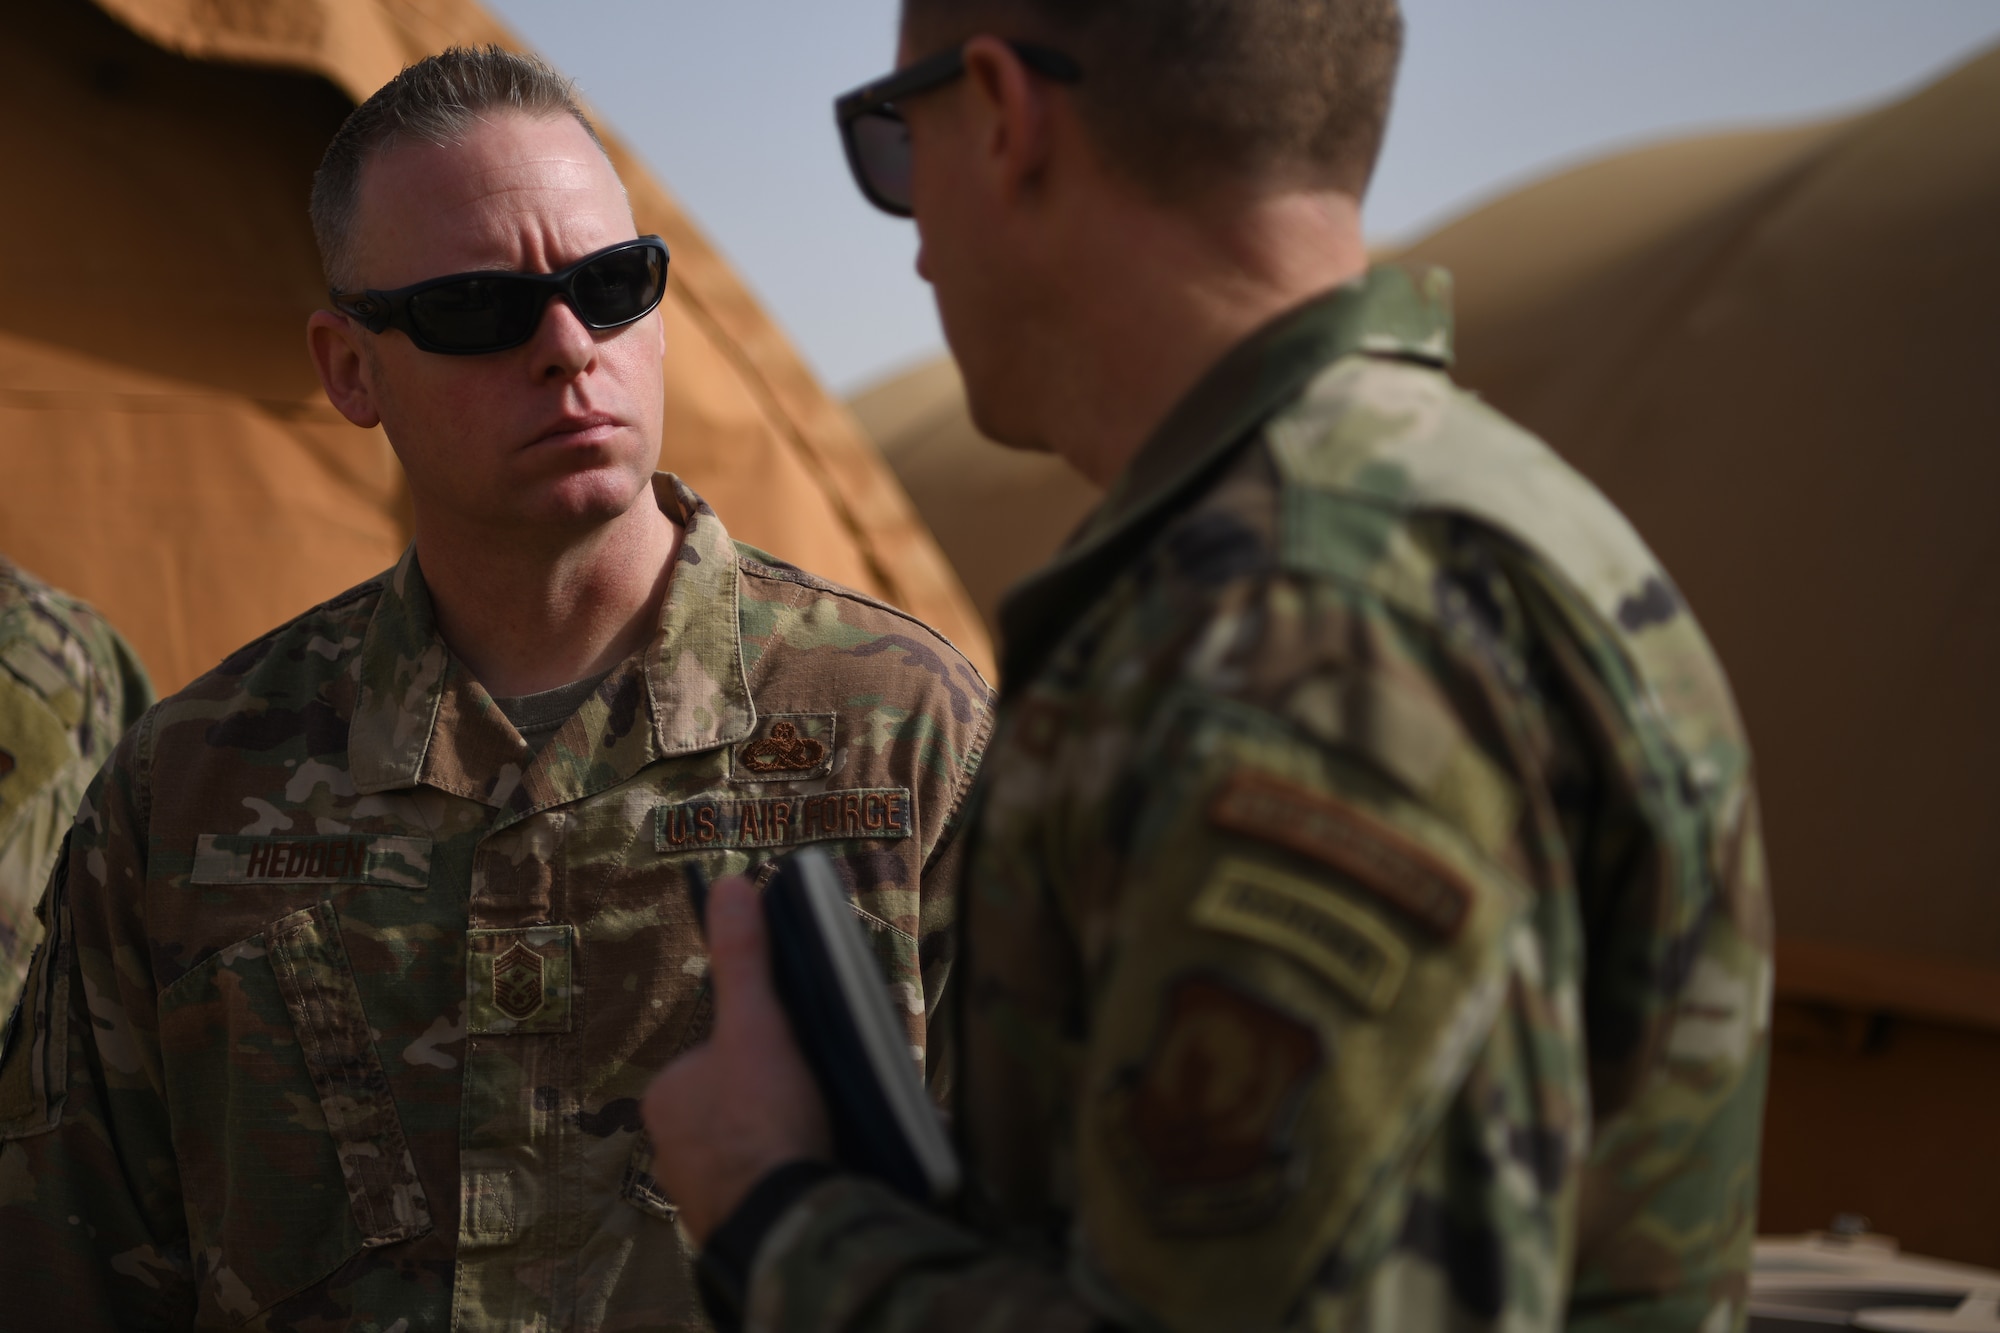 Chief Master Sgt. Benjamin W. Hedden, U.S. Air Forces in Europe and U.S. Air Forces Africa command chief, left, talks to Chief Master Sgt. Corey Crow, 435th Air Ground Operations Wing and 435th Air Expeditionary Wing command chief, at Nigerien Air Base 101, Niamey, Dec. 22, 202. Members from agency headquarters often conduct site visits to downrange personnel to measure team preparedness, capabilities, and receive ground level situational awareness. (U.S. Air Force photo by Senior Airman Ericka A. Woolever)